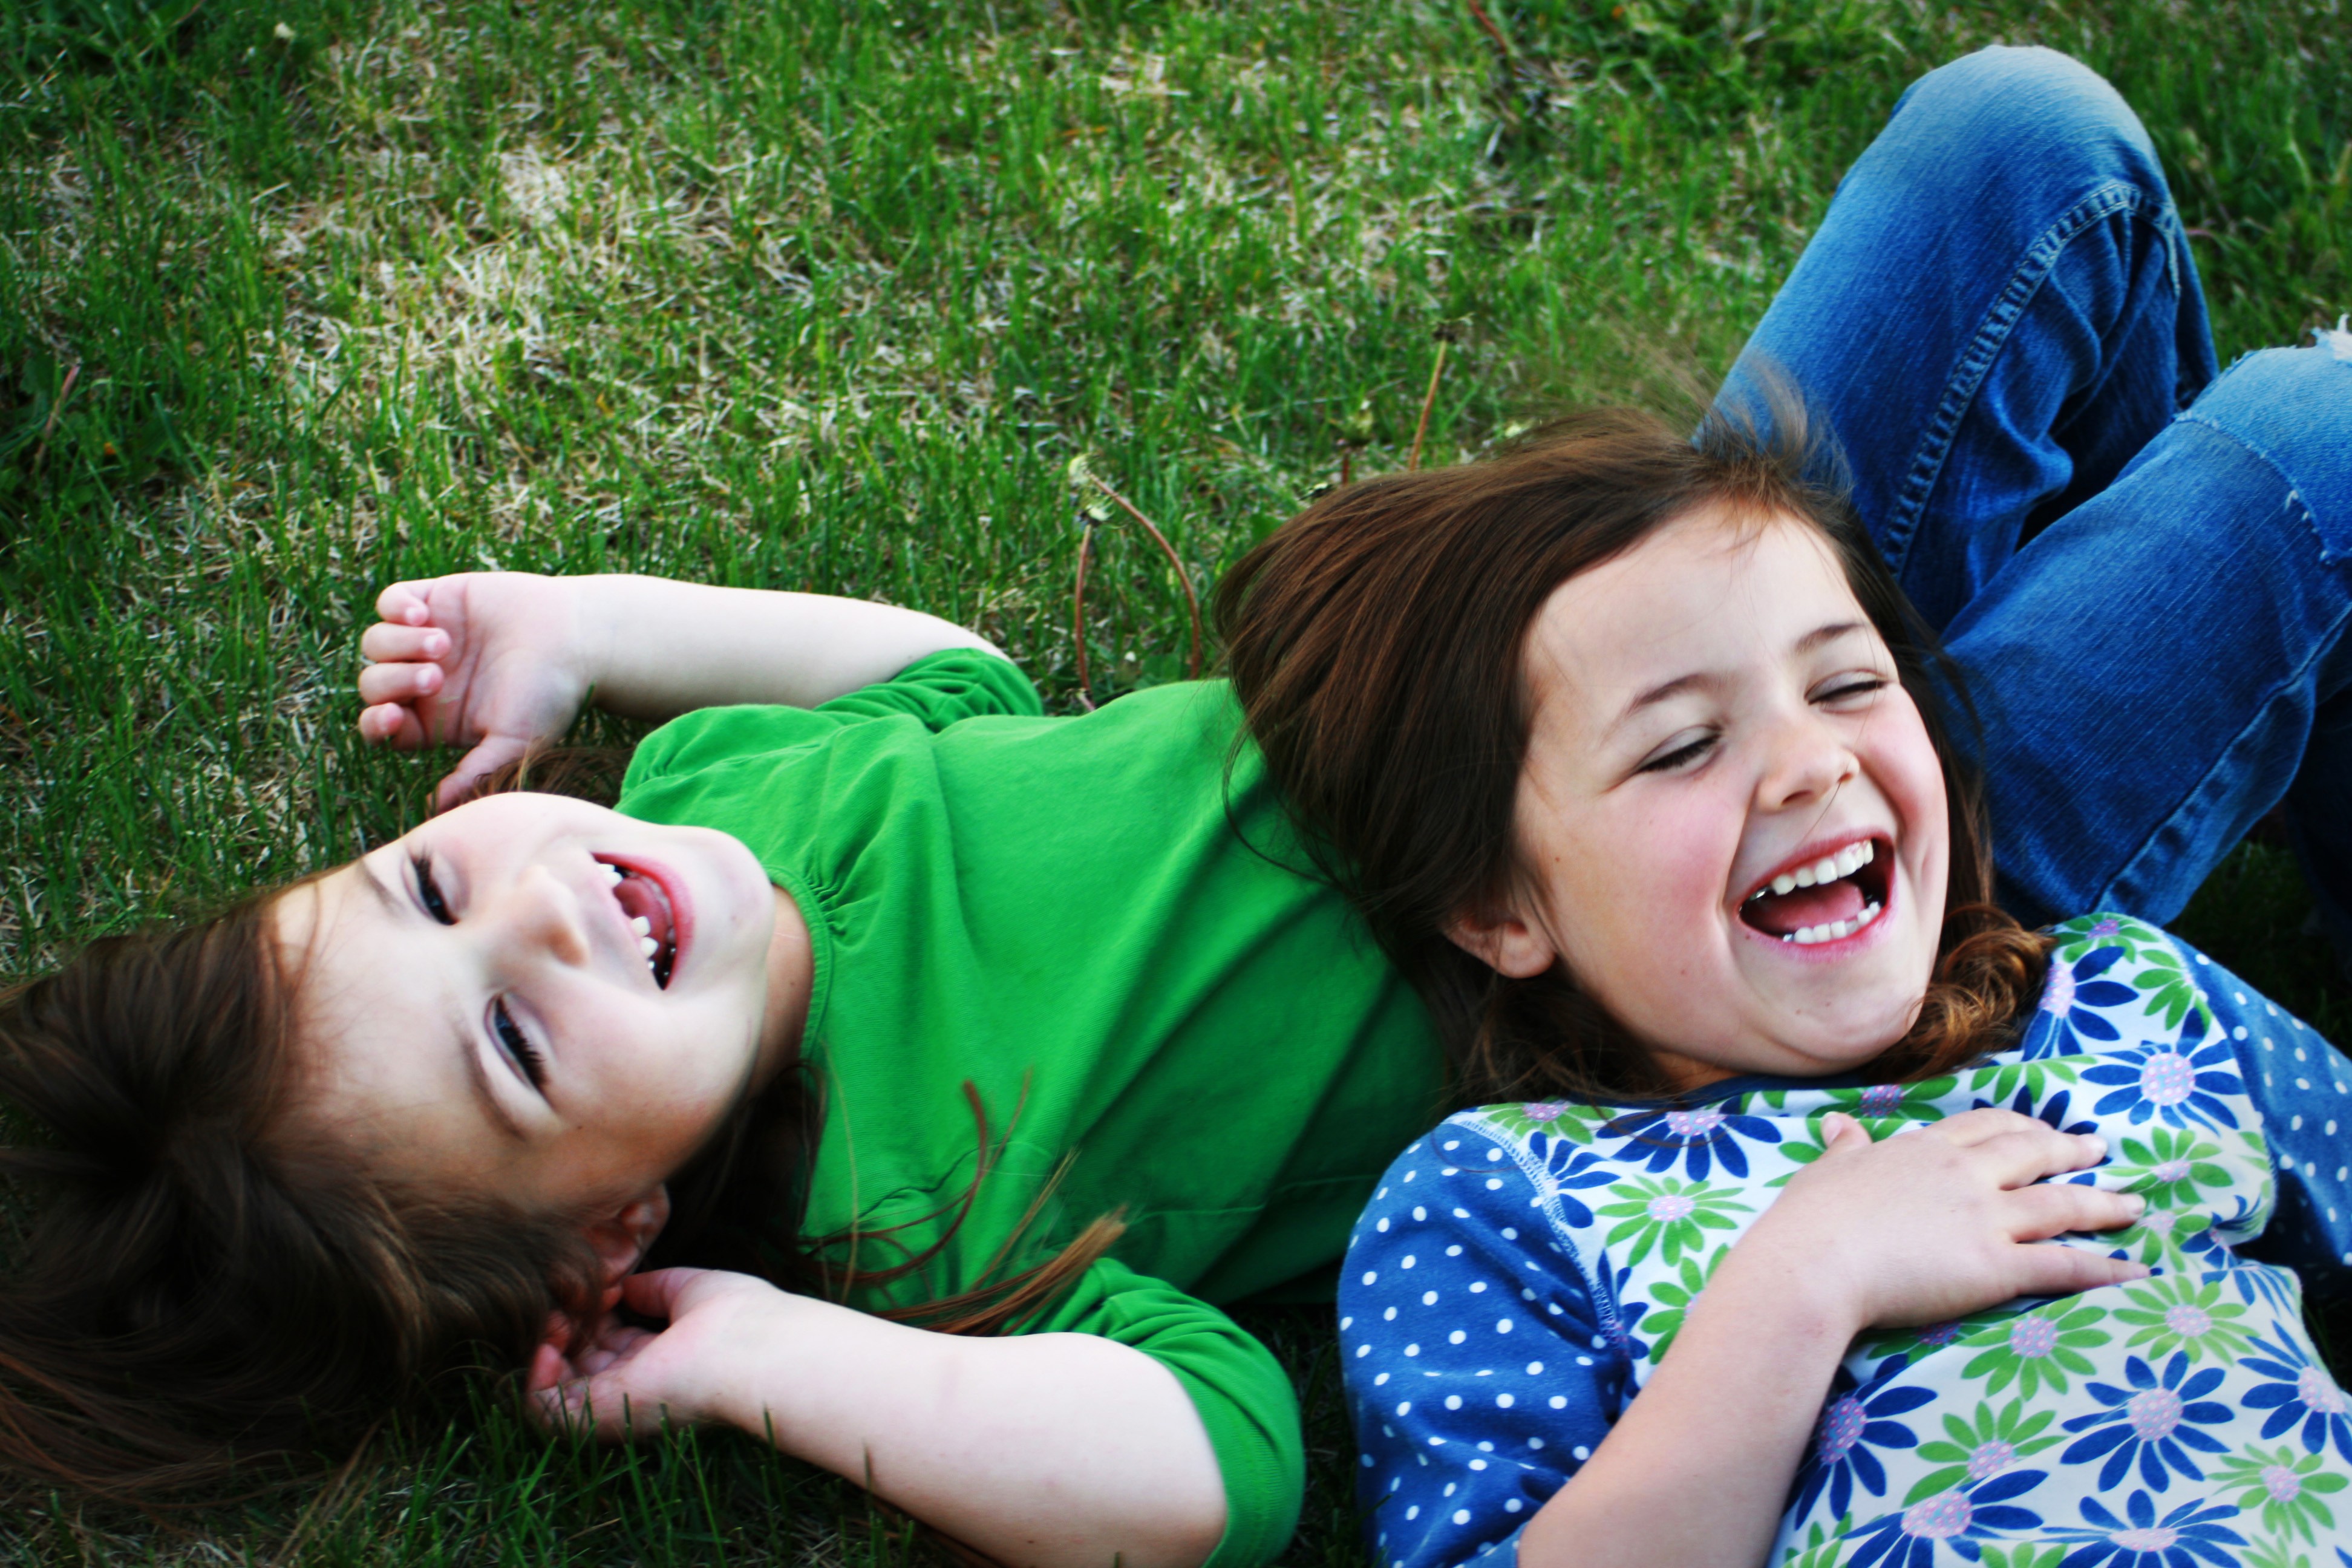 A girl lying in the grass with another girl lying on her stomach as both laugh.